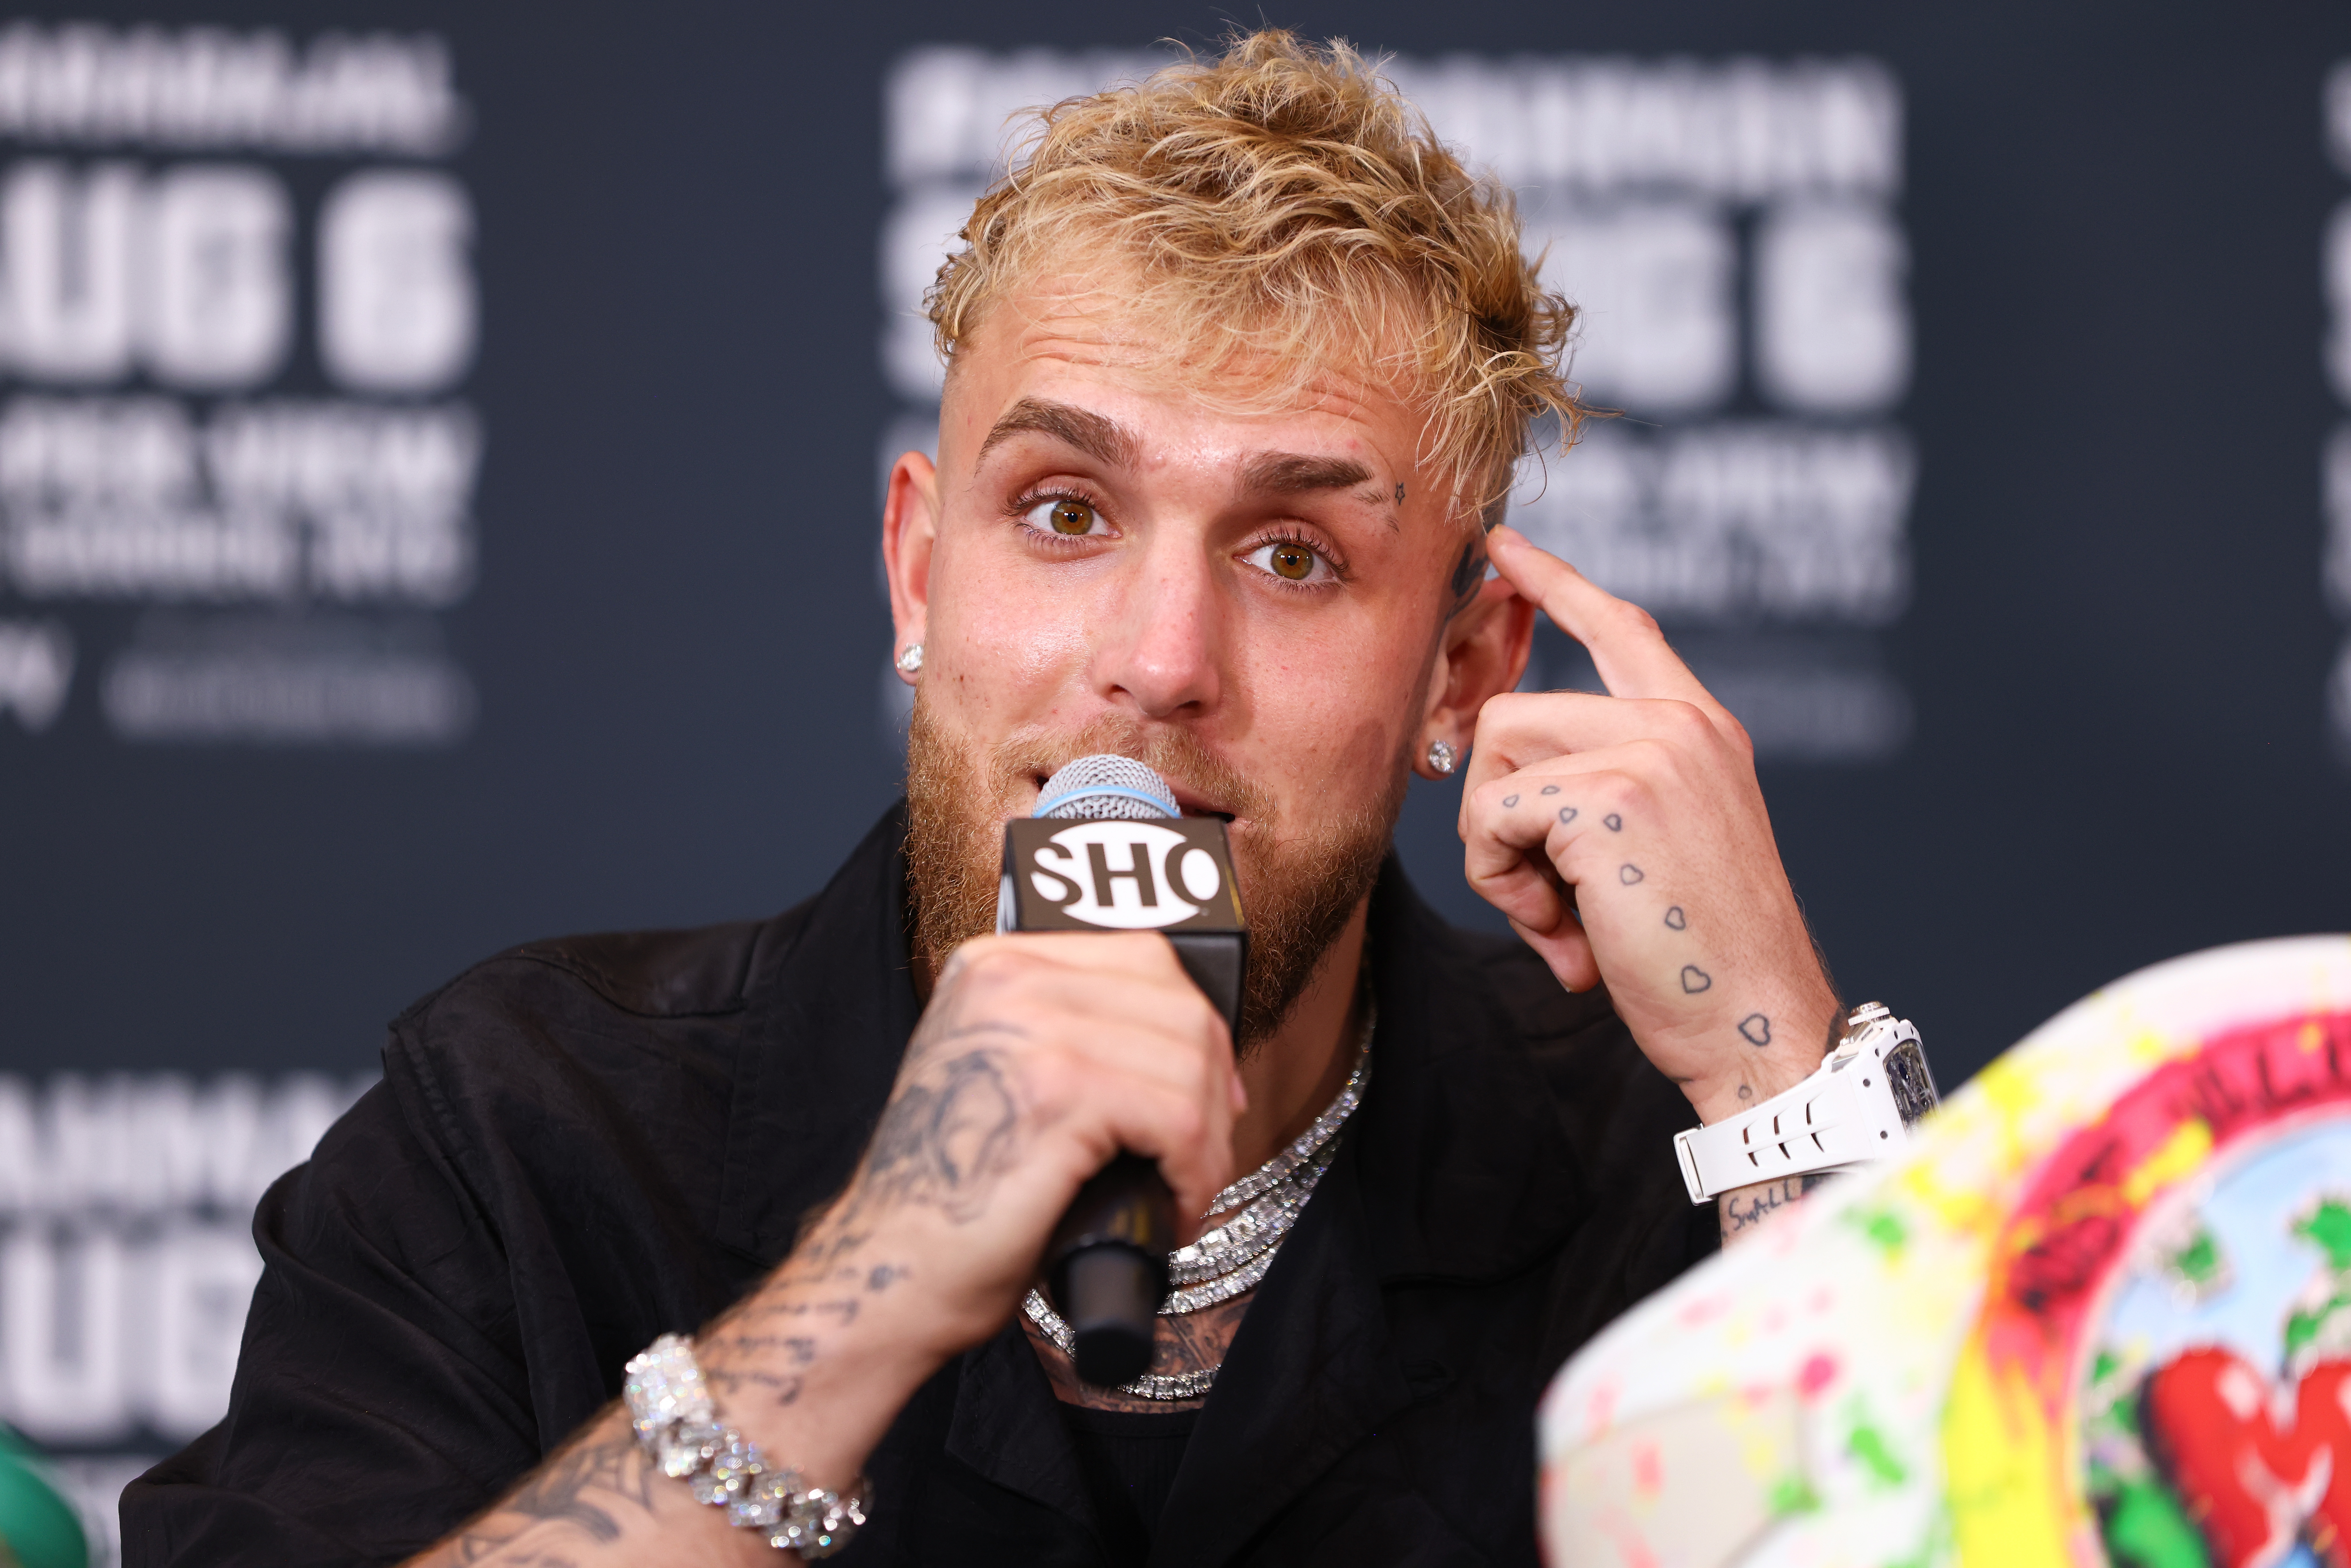 Possibly soon-to-be ranked pro boxer Jake Paul.